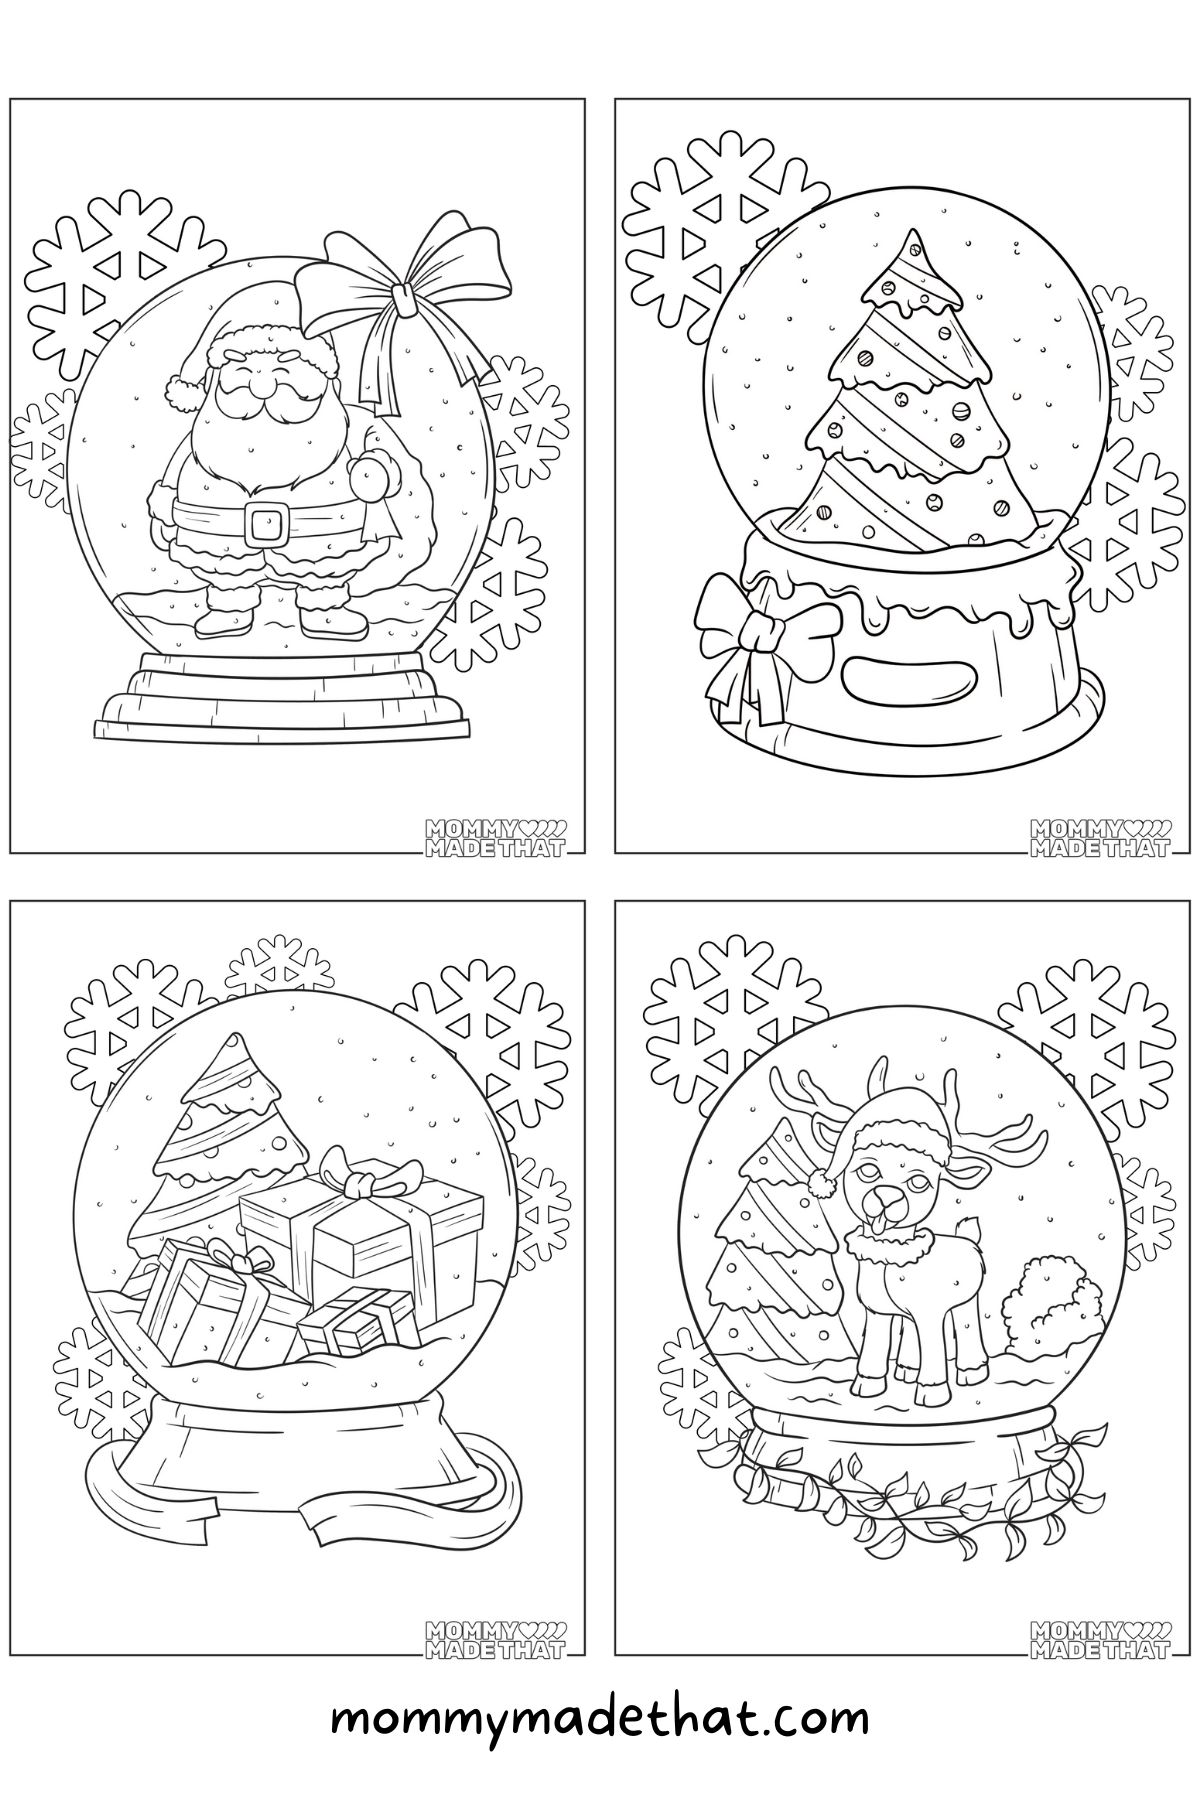 Adorable free snow globe coloring pages